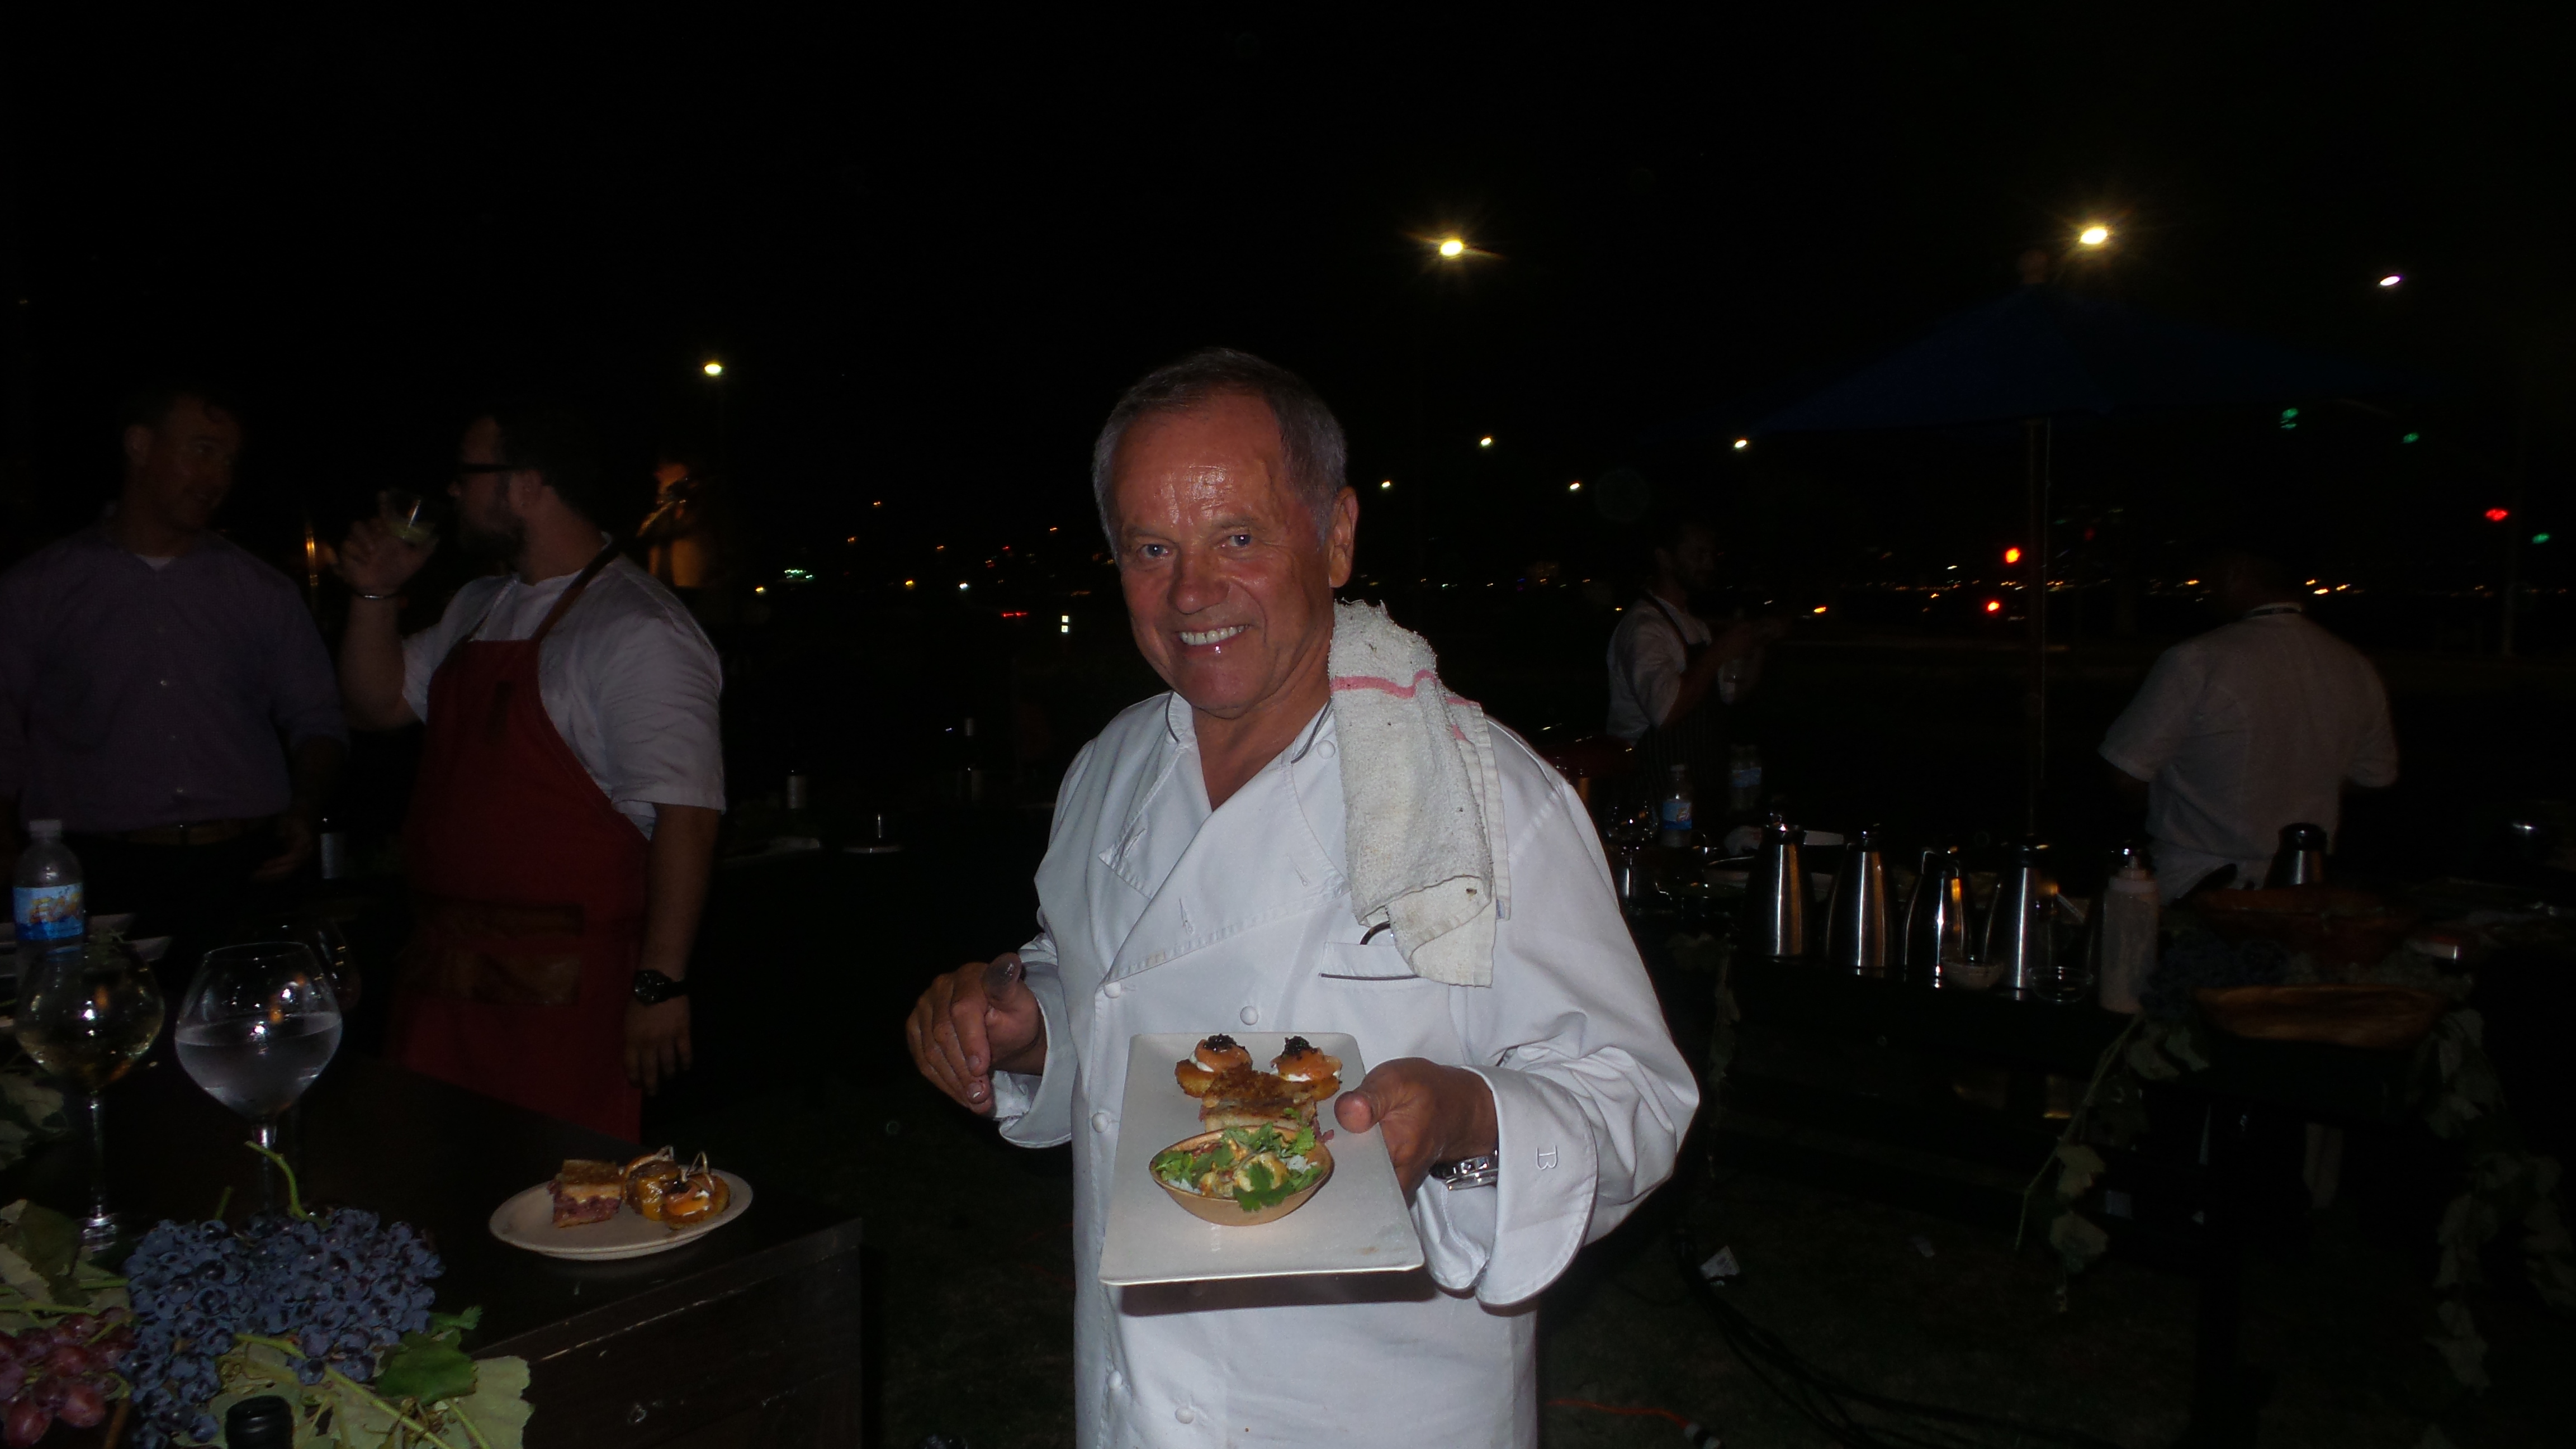 Wolfgang Puck prepared appetizers to paid with his four new varietals featured at the event